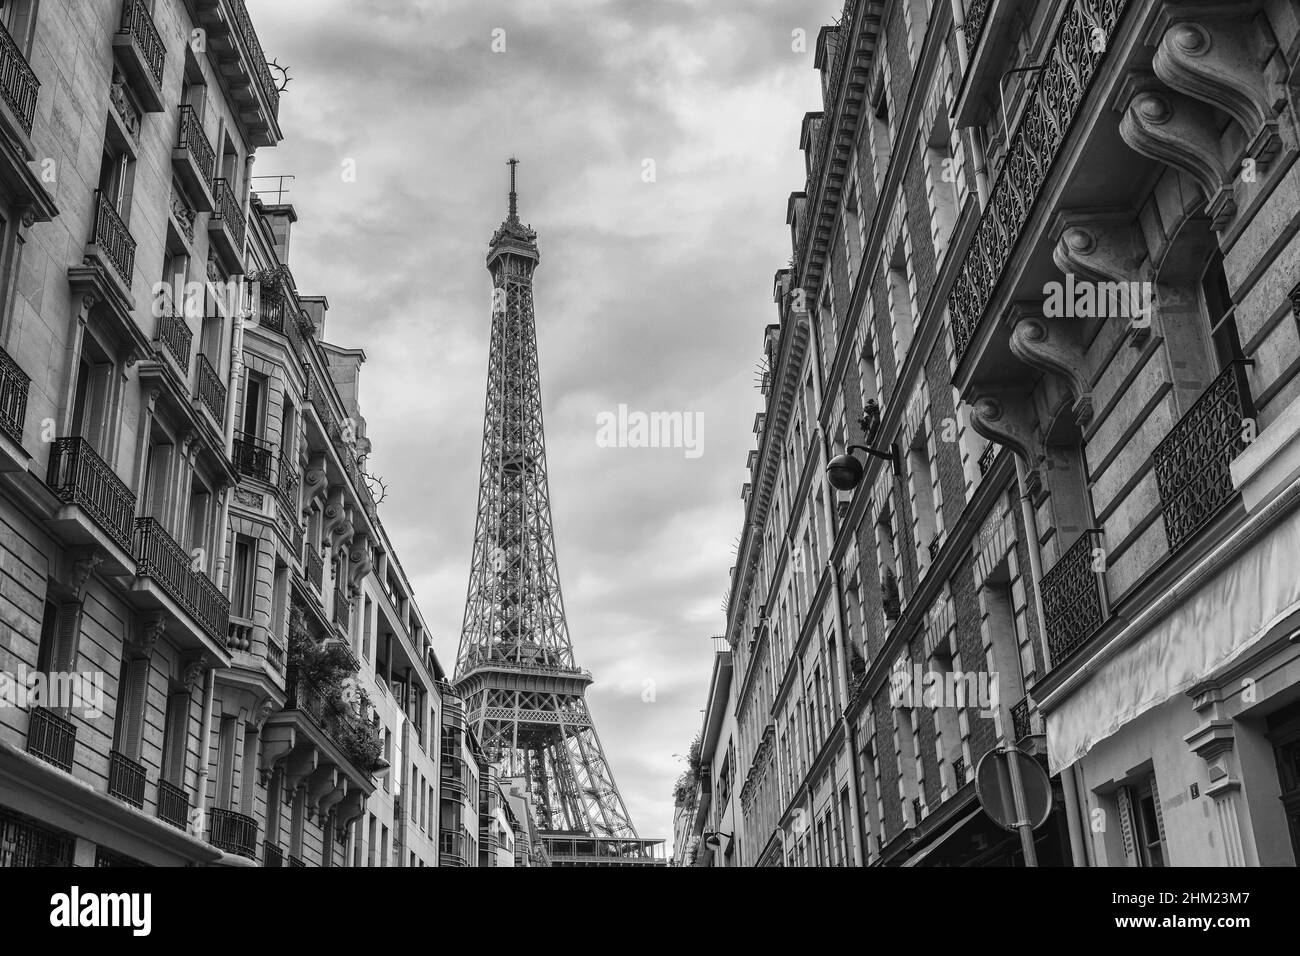 View of the Eiffel Tower from the old Town in Paris, France Stock Photo